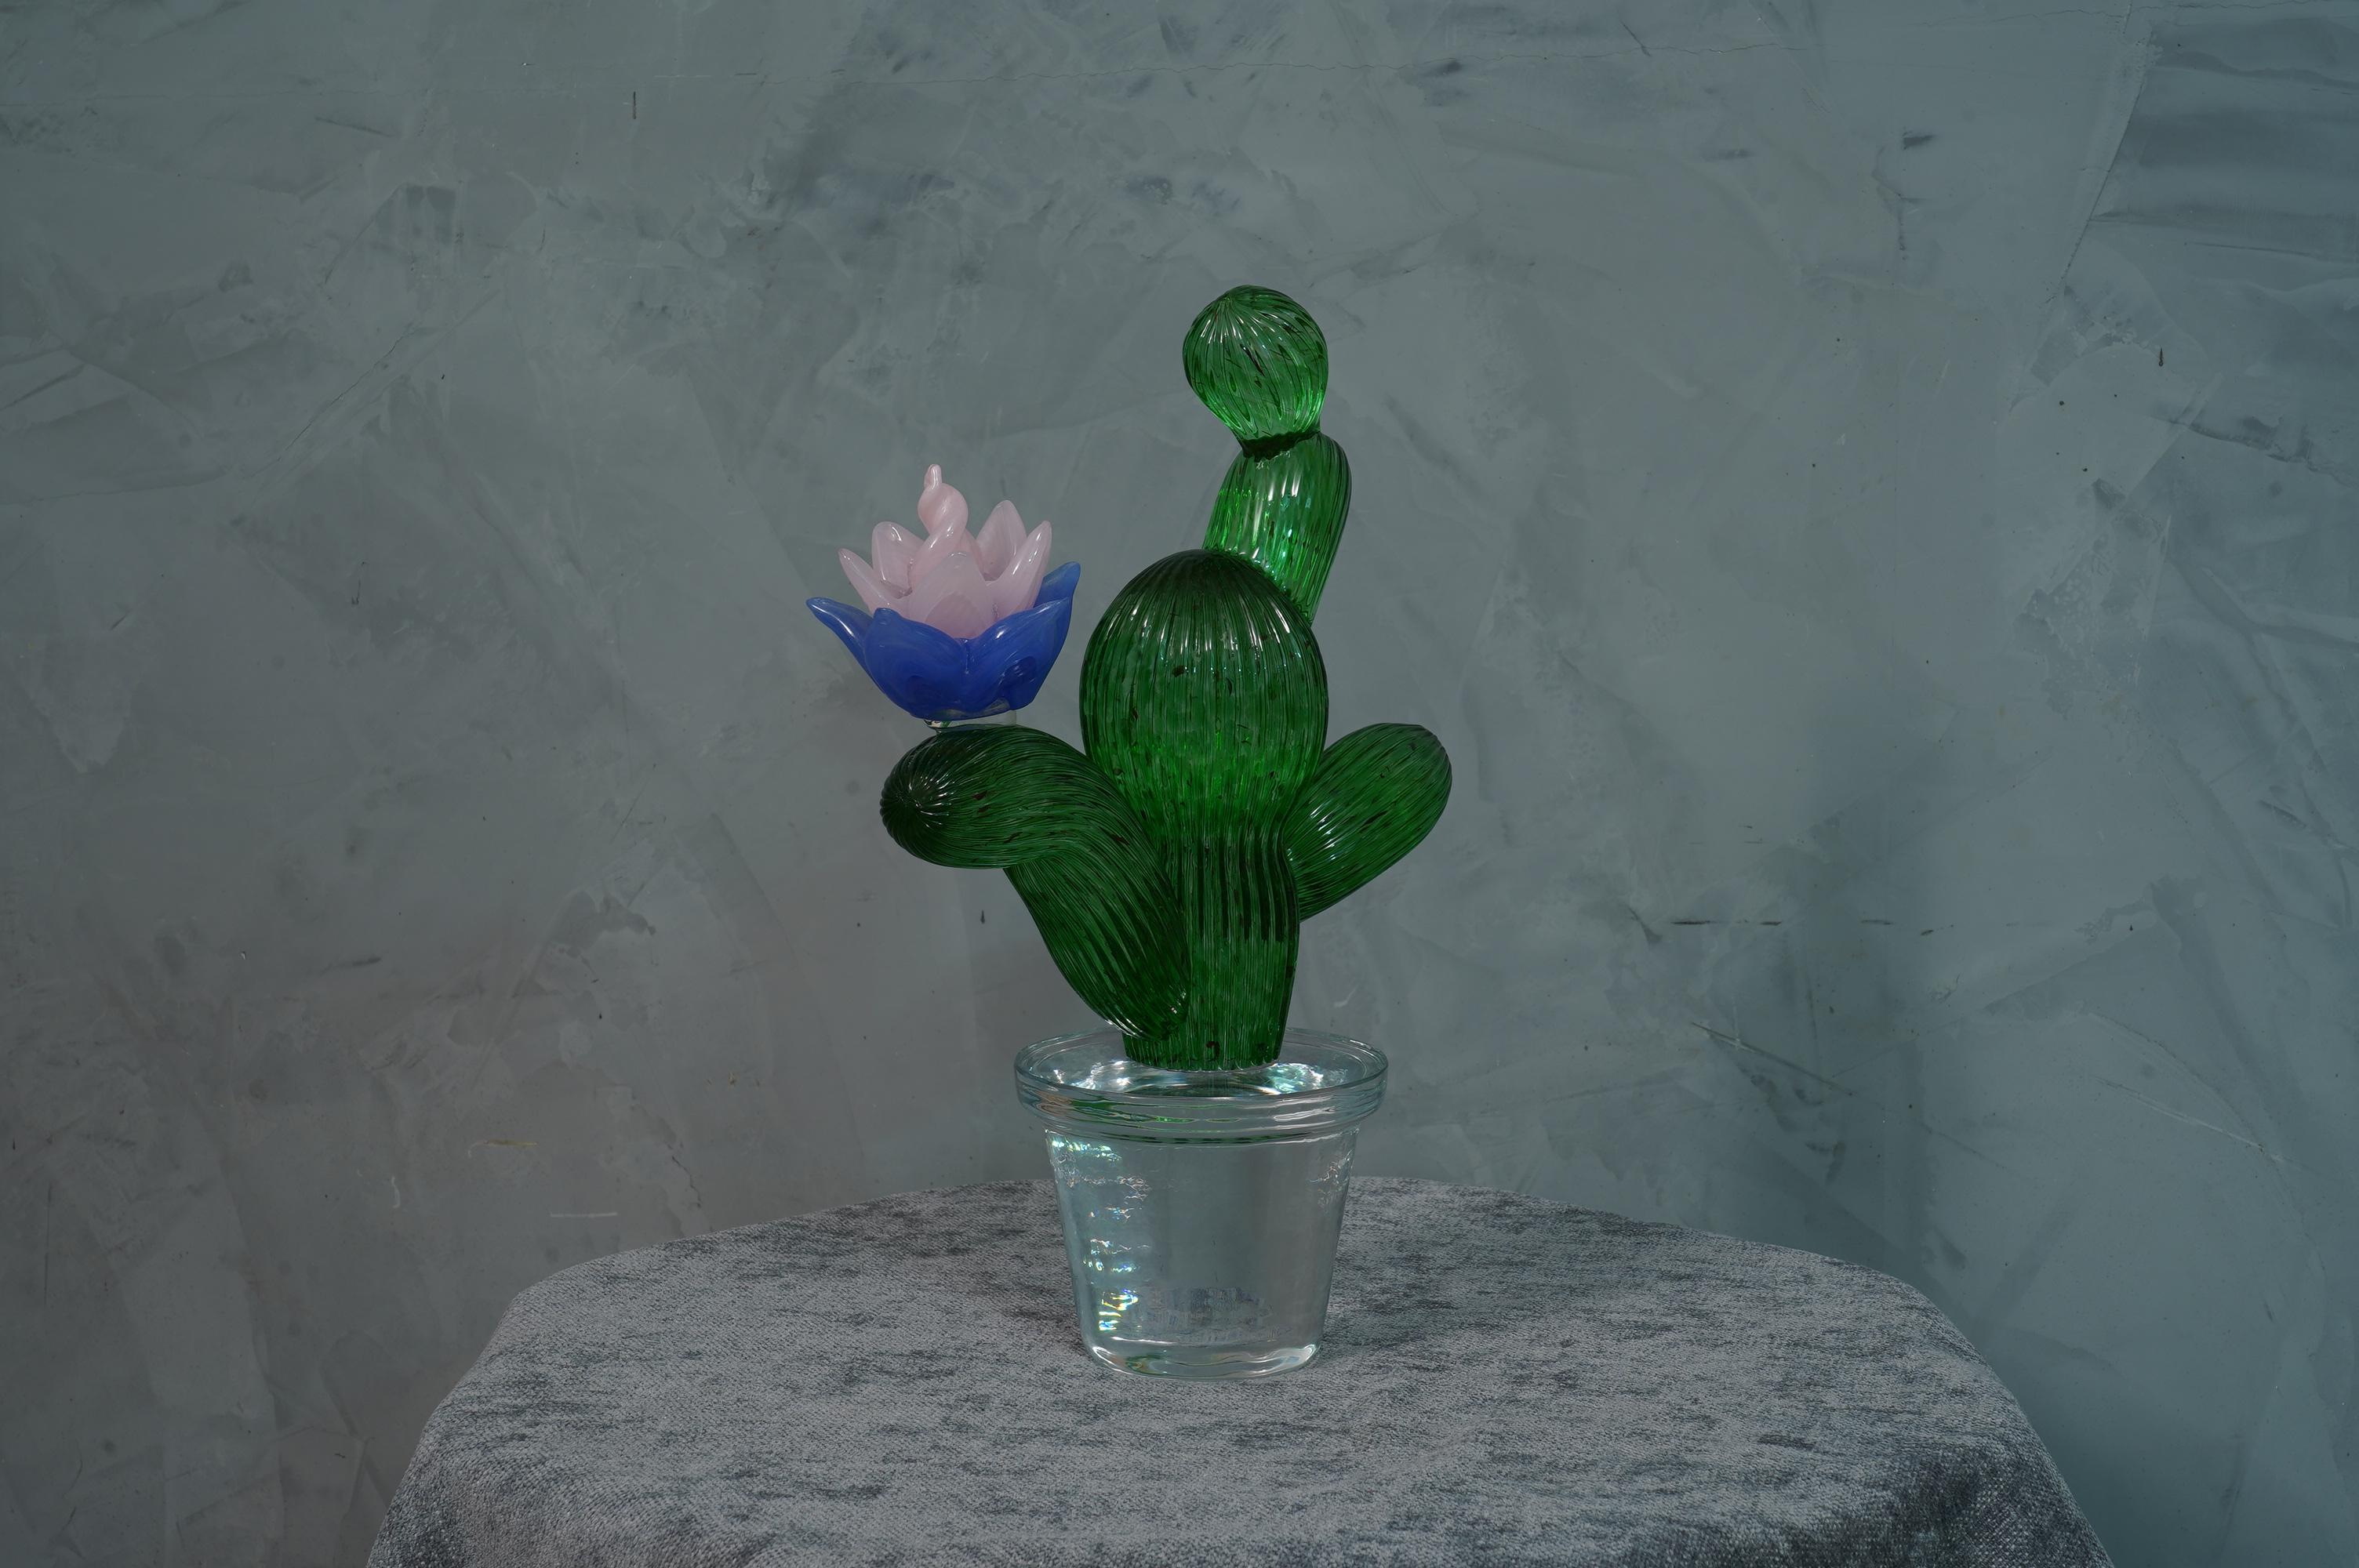 Italian design by Marta Marzotto creator of style, this cactus is a fashion icon of the Italian style, emerald green with a blue and yellow colored spot, the flower.

In limited edition, as can be seen from the writing under the transparent vase